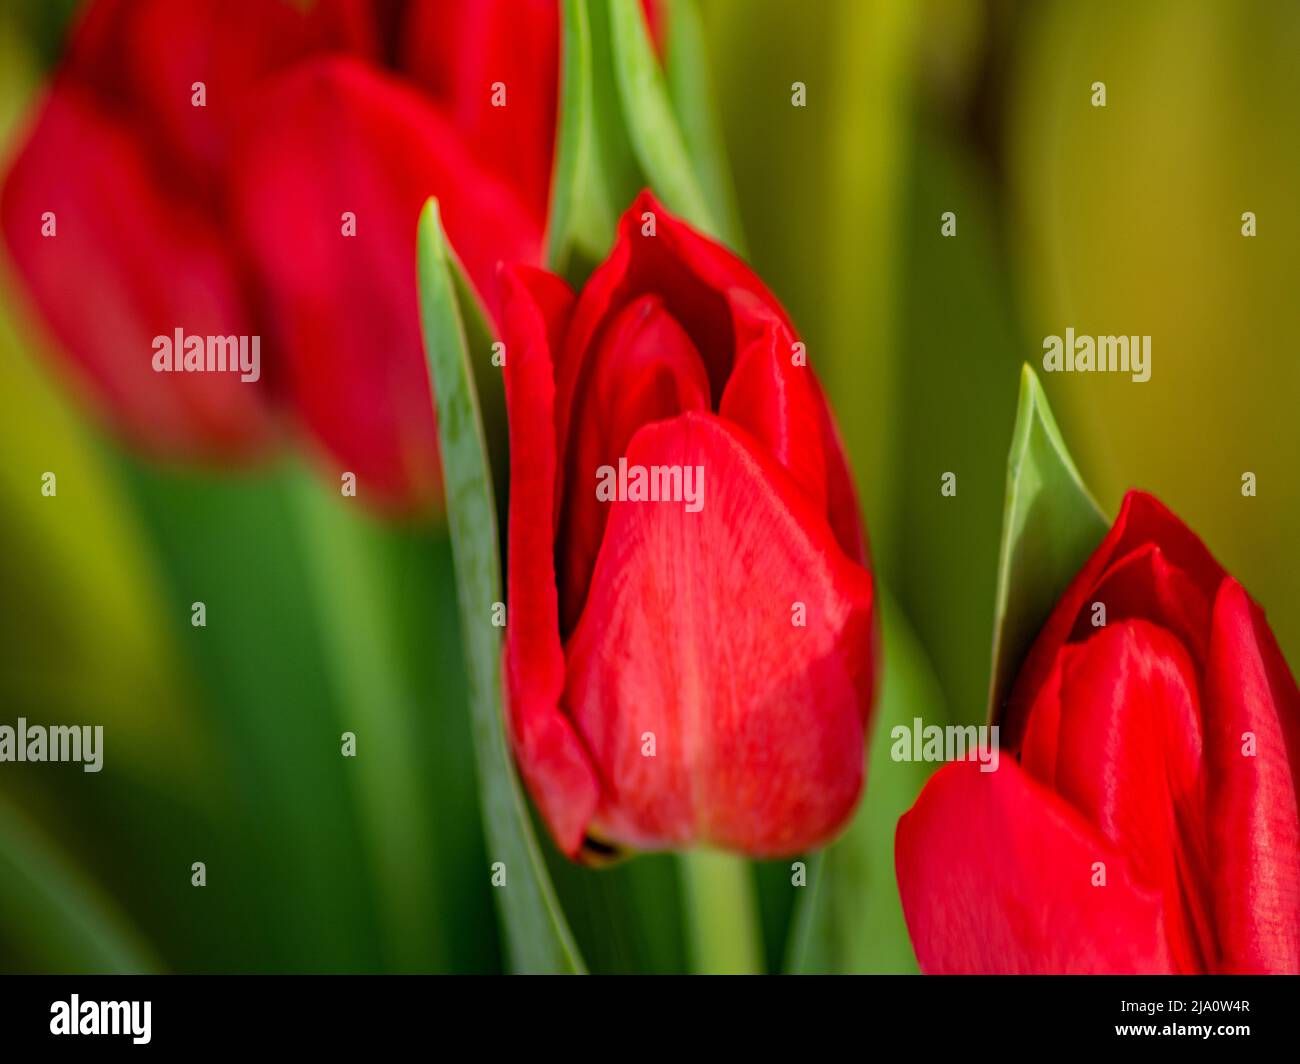 FLORAL : Red tulips Stock Photo